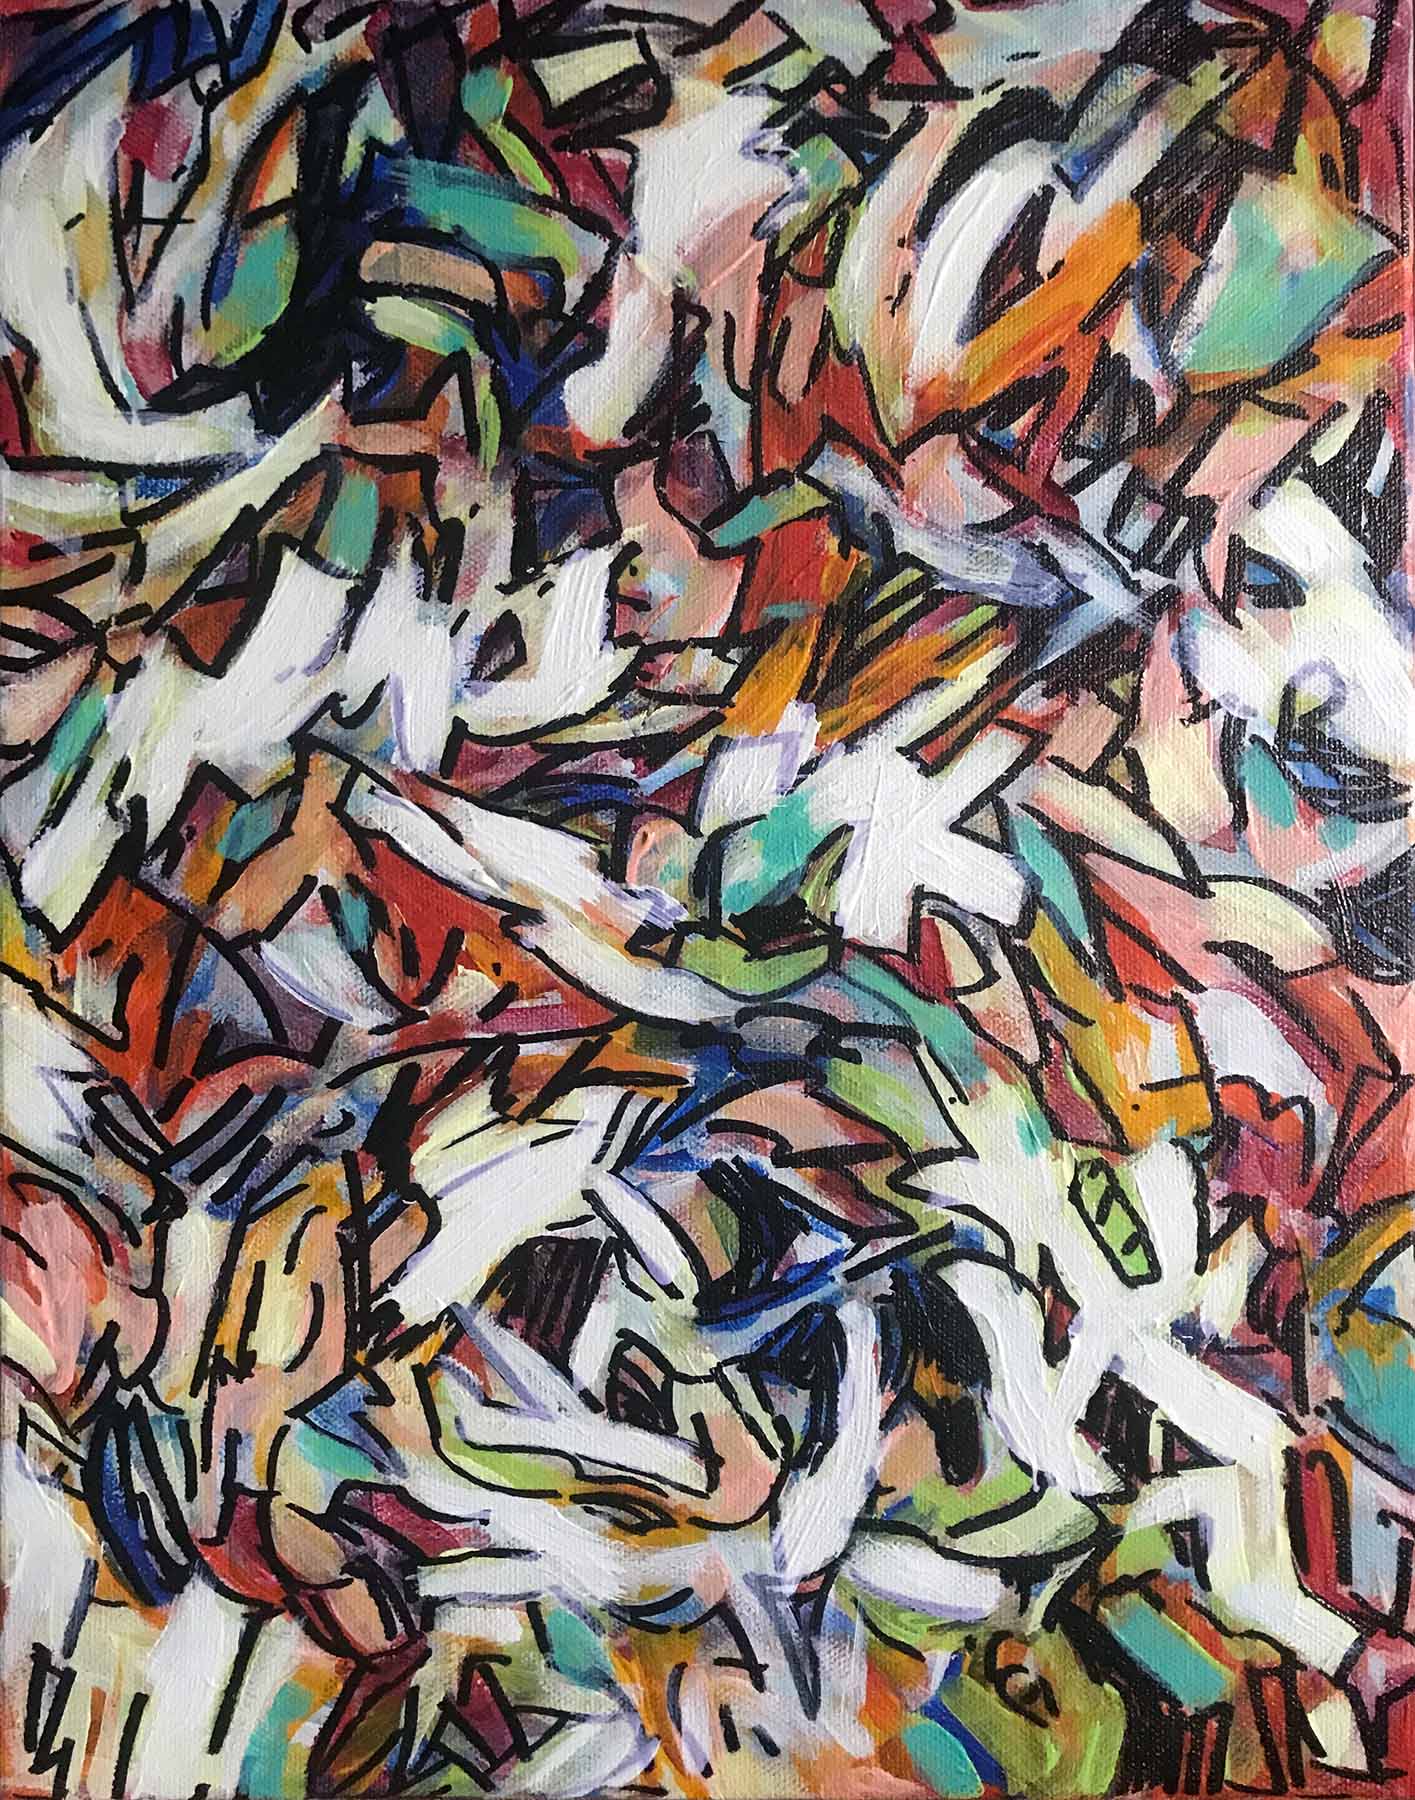 Acrylic and sharpie abstract painting - Jigsaw